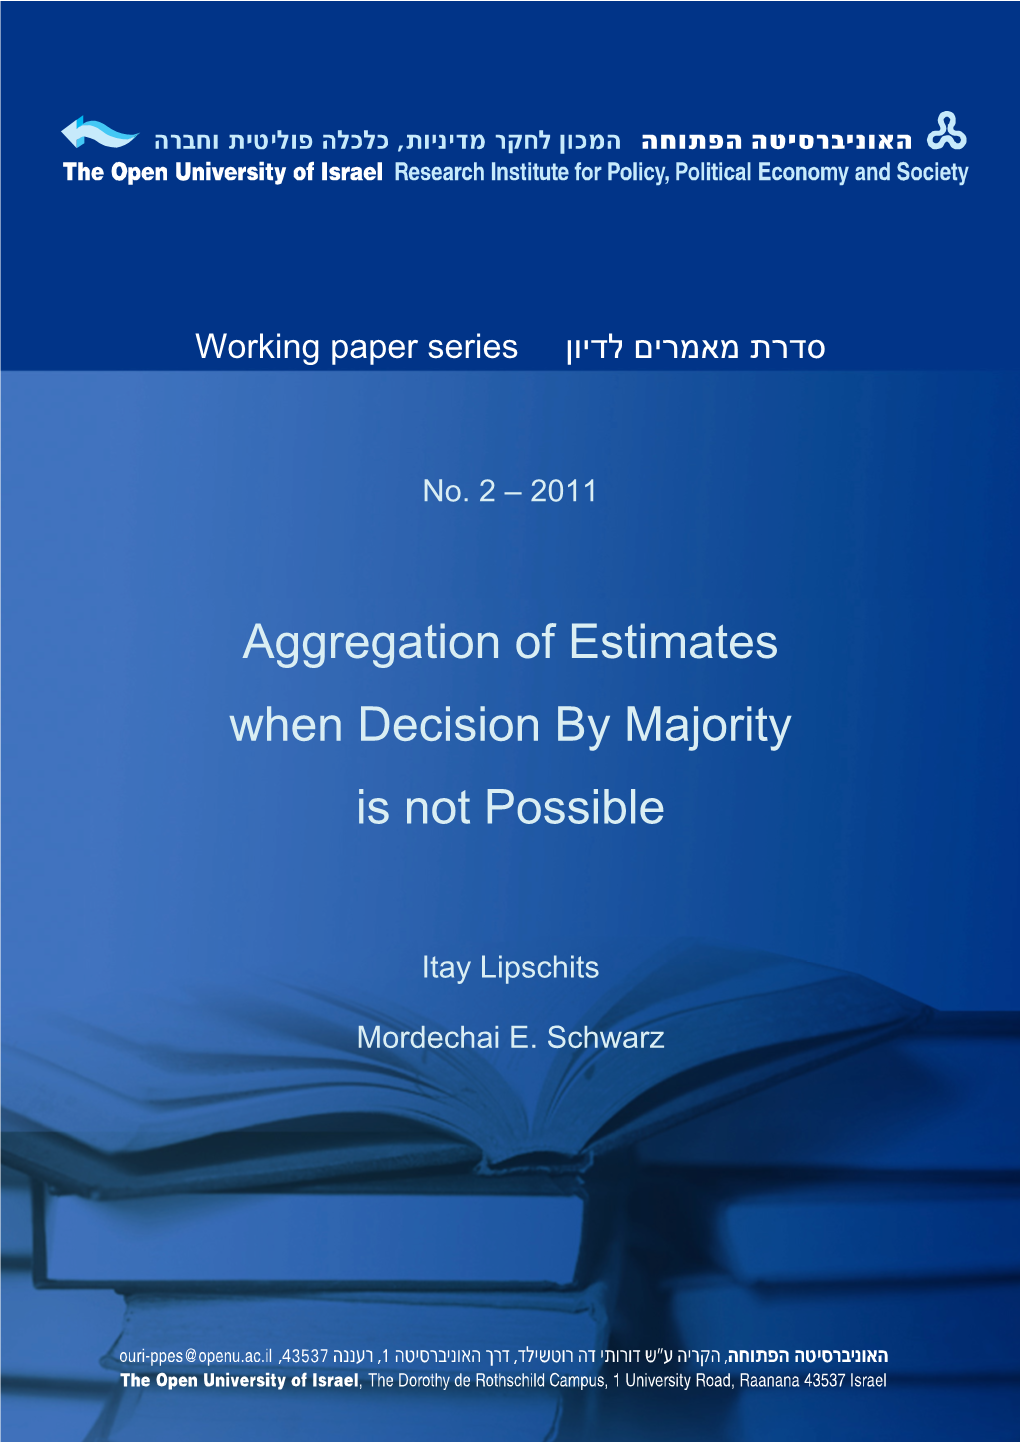 Aggregation of Estimates When Decision by Majority Is Not Possible